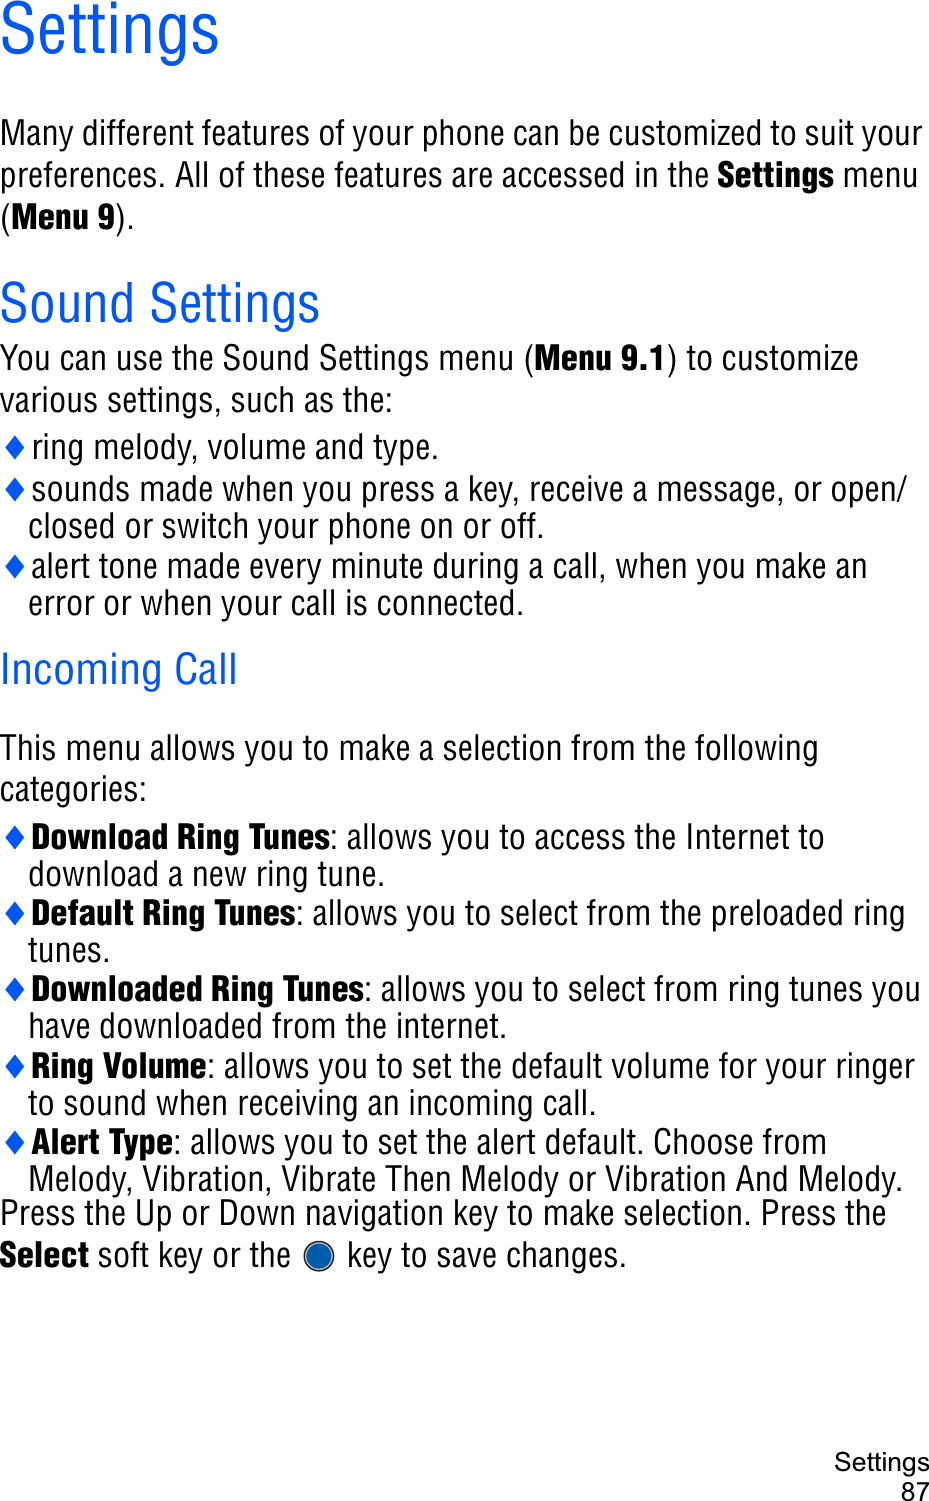 Settings87SettingsMany different features of your phone can be customized to suit your preferences. All of these features are accessed in the Settings menu (Menu 9).Sound SettingsYou can use the Sound Settings menu (Menu 9.1) to customize various settings, such as the:iring melody, volume and type.isounds made when you press a key, receive a message, or open/closed or switch your phone on or off.ialert tone made every minute during a call, when you make an error or when your call is connected.Incoming CallThis menu allows you to make a selection from the following categories:iDownload Ring Tunes: allows you to access the Internet to download a new ring tune. iDefault Ring Tunes: allows you to select from the preloaded ring tunes.iDownloaded Ring Tunes: allows you to select from ring tunes you have downloaded from the internet.iRing Volume: allows you to set the default volume for your ringer to sound when receiving an incoming call.iAlert Type: allows you to set the alert default. Choose from Melody, Vibration, Vibrate Then Melody or Vibration And Melody. Press the Up or Down navigation key to make selection. Press the Select soft key or the   key to save changes.